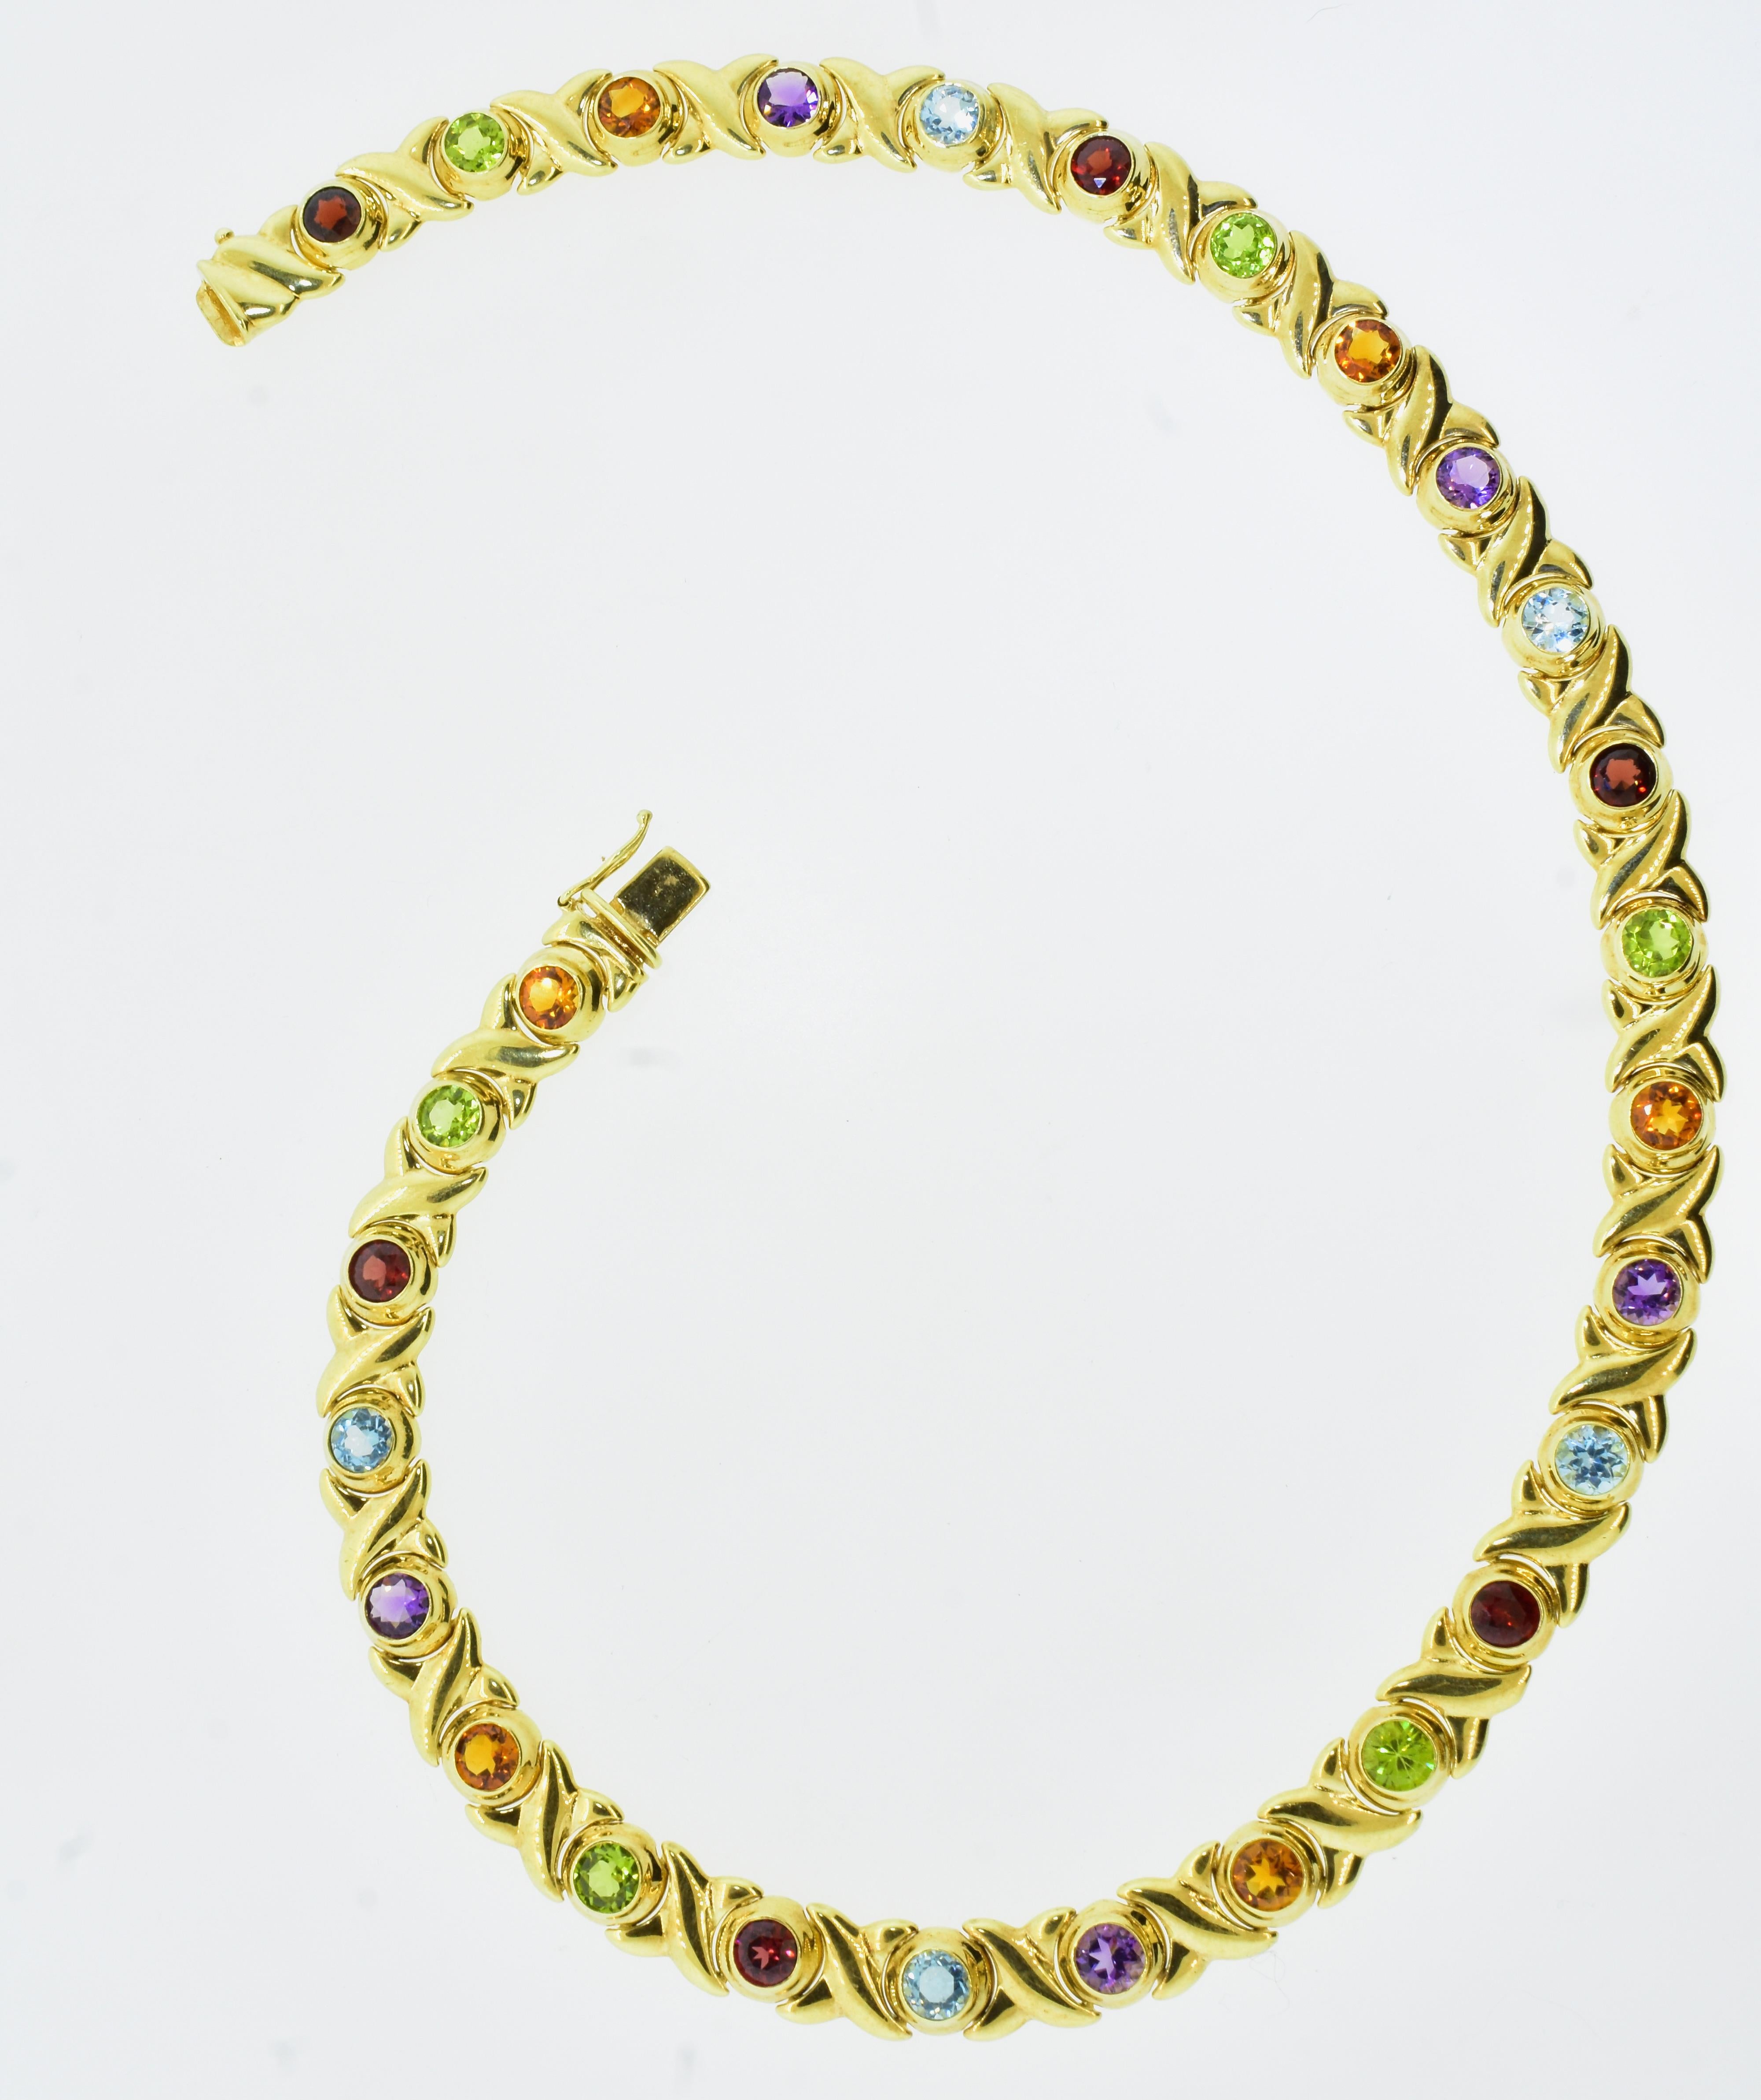 Fine multi-color natural gems are bezel set in a fine yellow gold necklace.  The 28 natural bright round brilliant cut stones  - 5 amethyst, 6 peridot, 6 madeira citrine, 6 garnet and 5 blue topaz are all set between yellow gold X motifs.  The